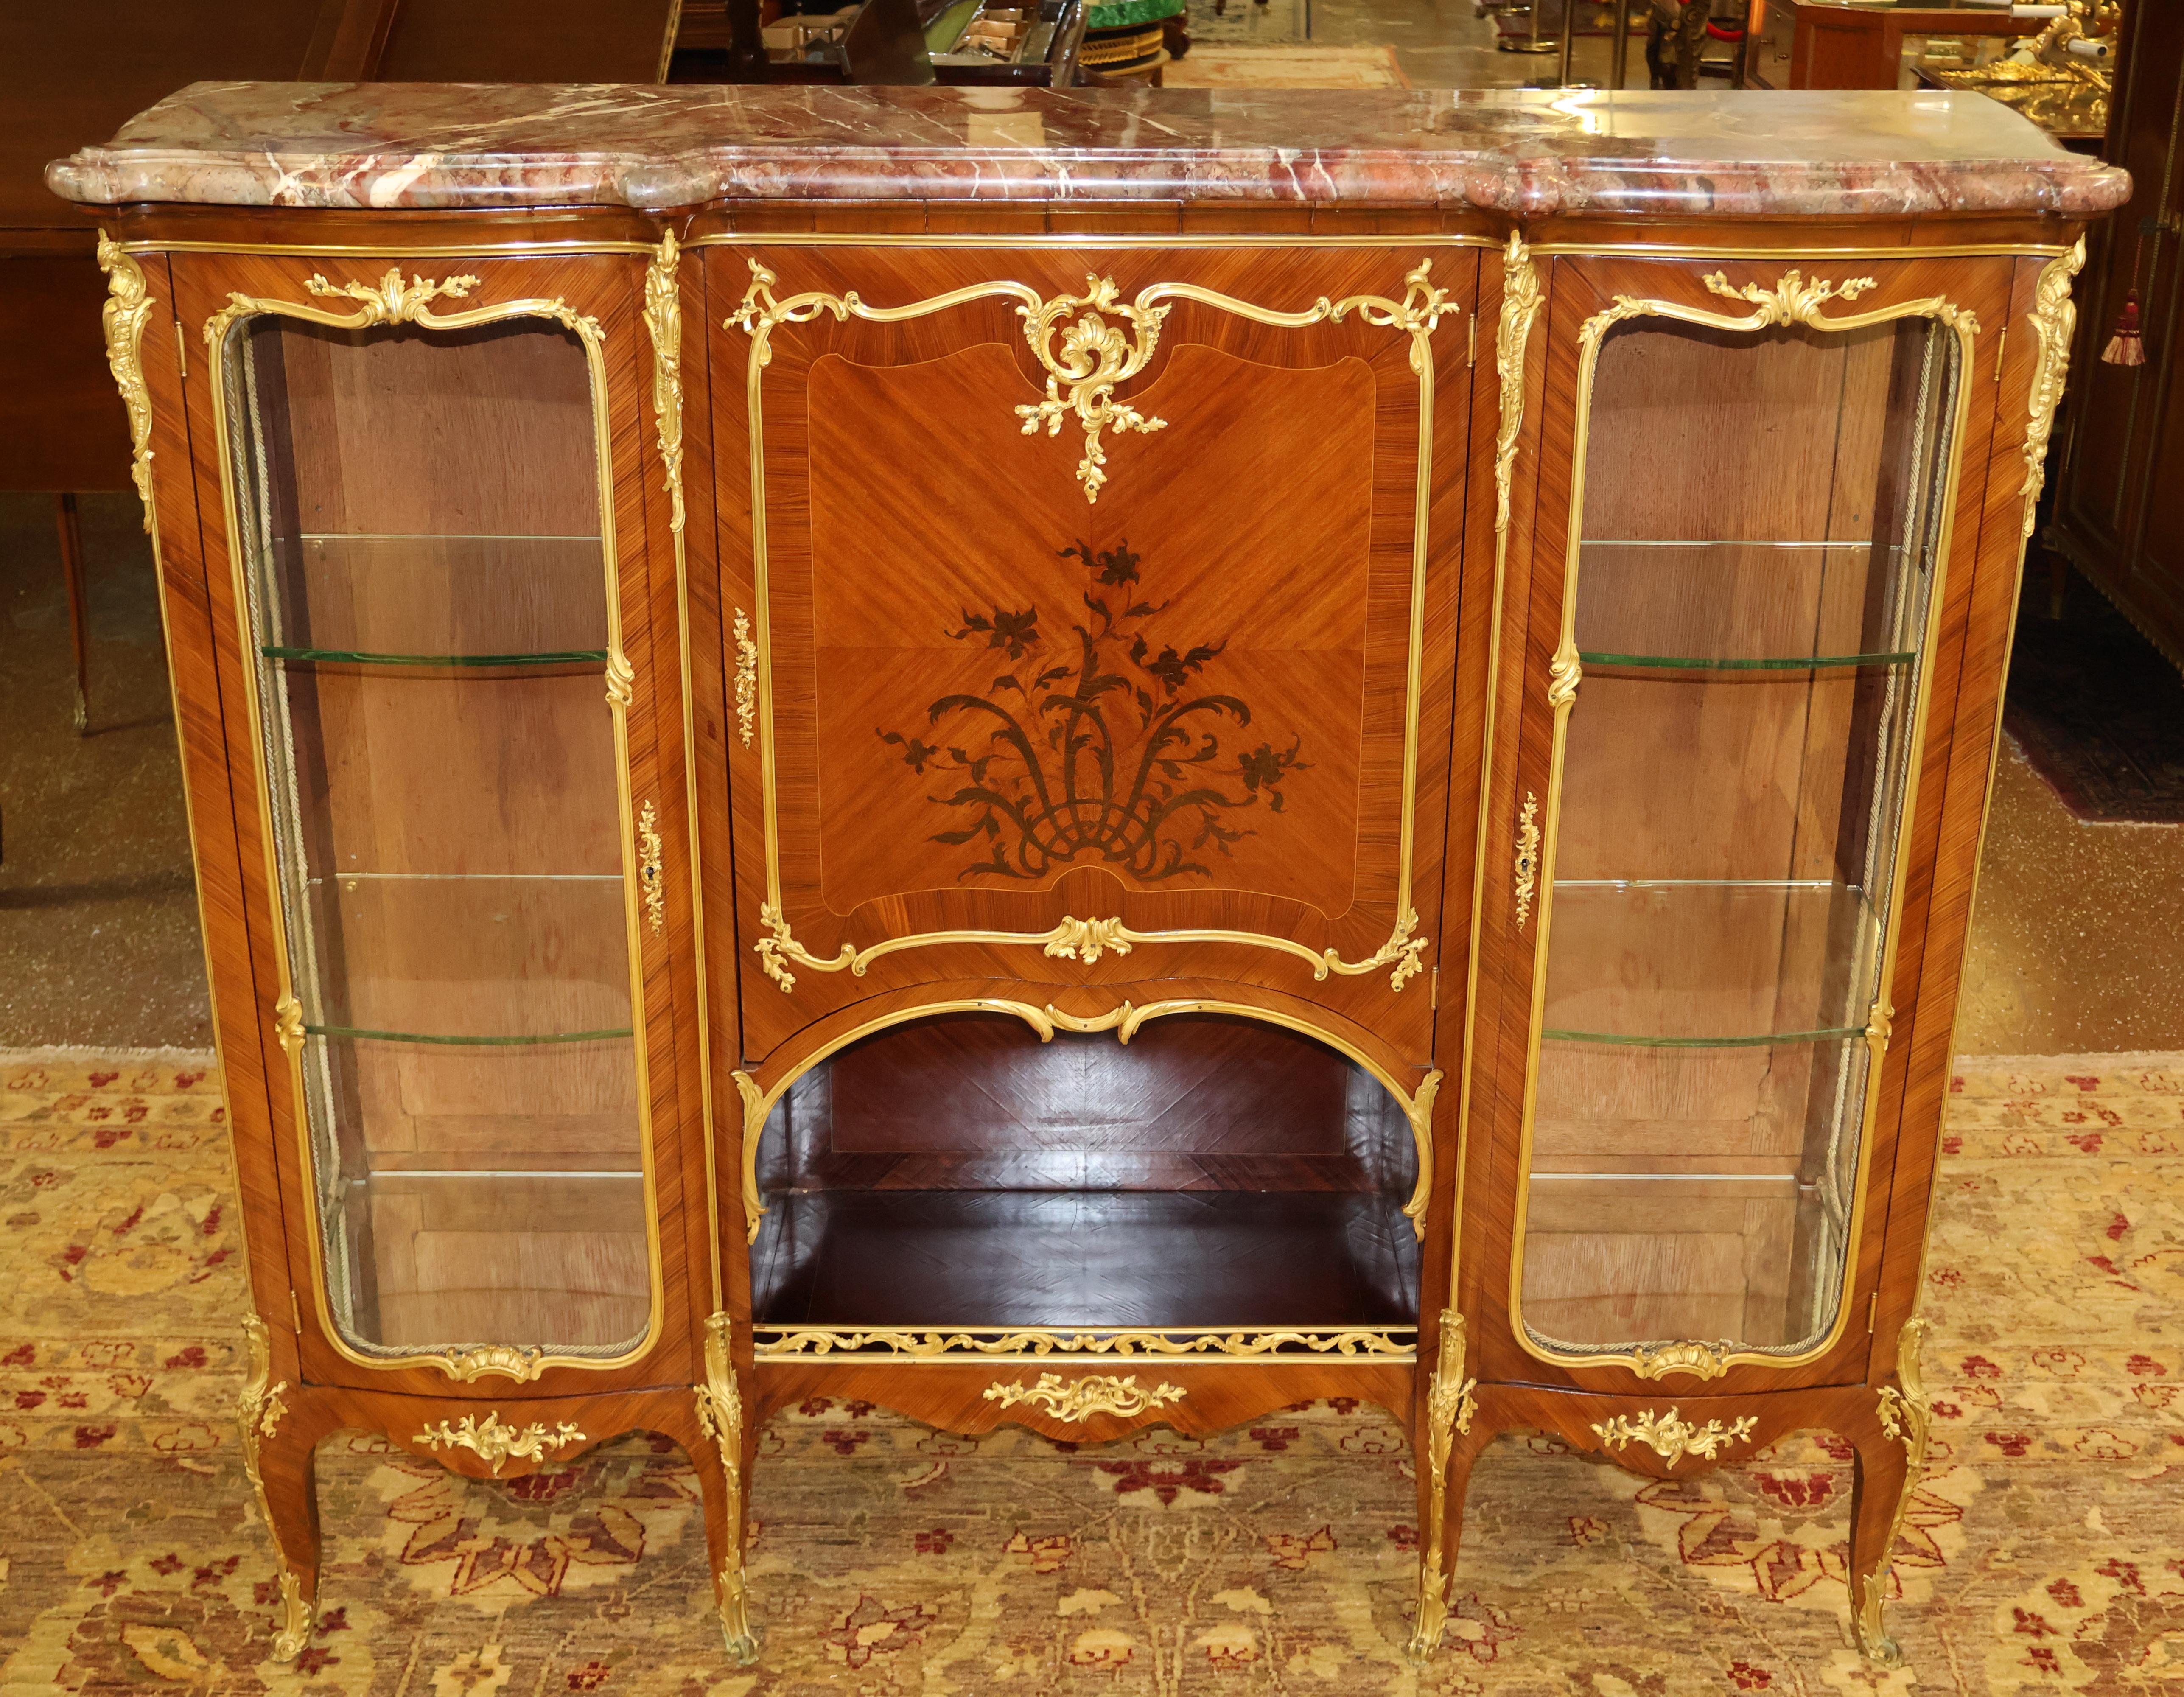 Marble Top French Ormolu Kingwood Inlaid Marquetry Vitrine Attributed To Linke

Dimensions : 55